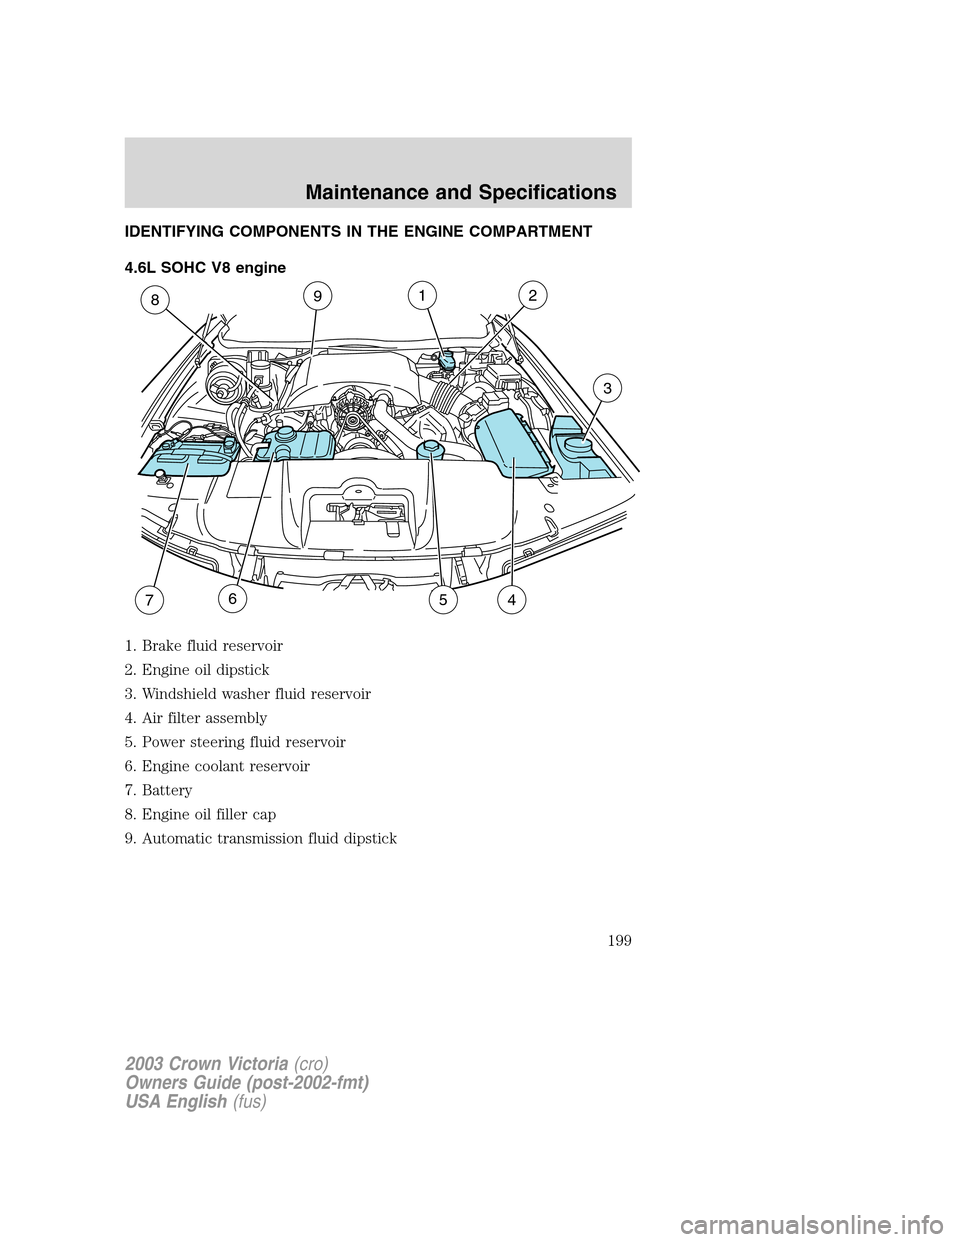 FORD CROWN VICTORIA 2003 2.G User Guide IDENTIFYING COMPONENTS IN THE ENGINE COMPARTMENT
4.6L SOHC V8 engine
1. Brake fluid reservoir
2. Engine oil dipstick
3. Windshield washer fluid reservoir
4. Air filter assembly
5. Power steering fluid